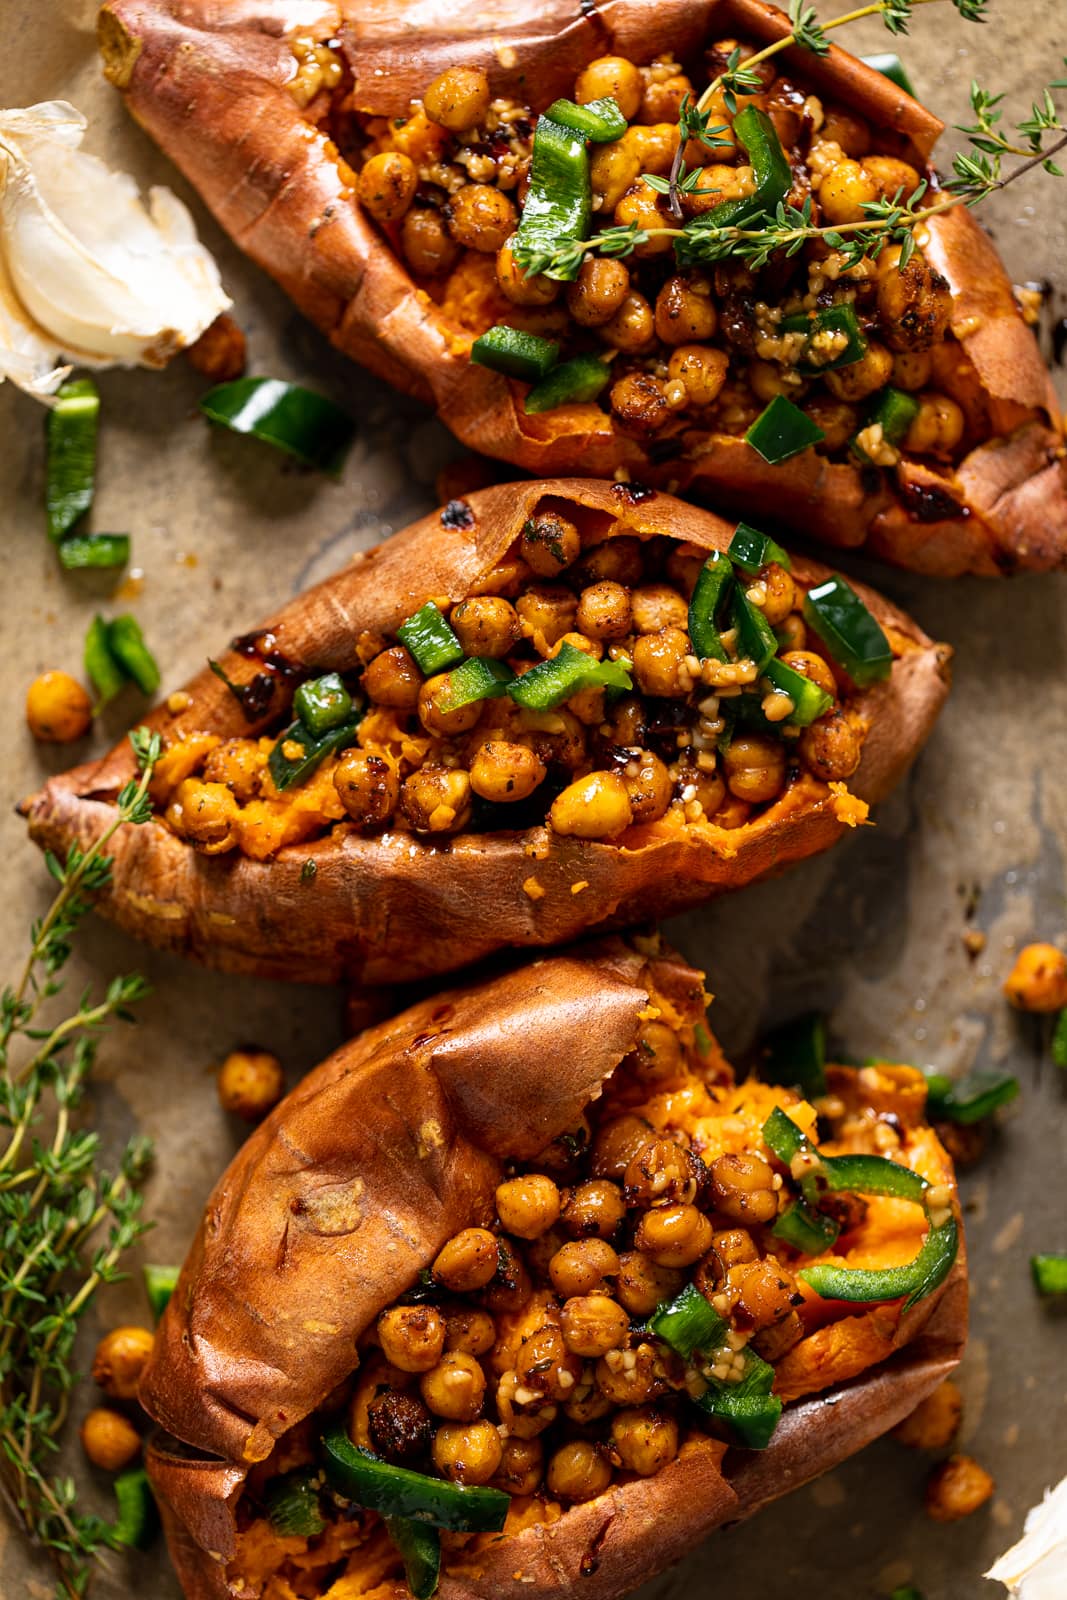 Overhead shot of several Spiced Chickpea Stuffed Sweet Potatoes